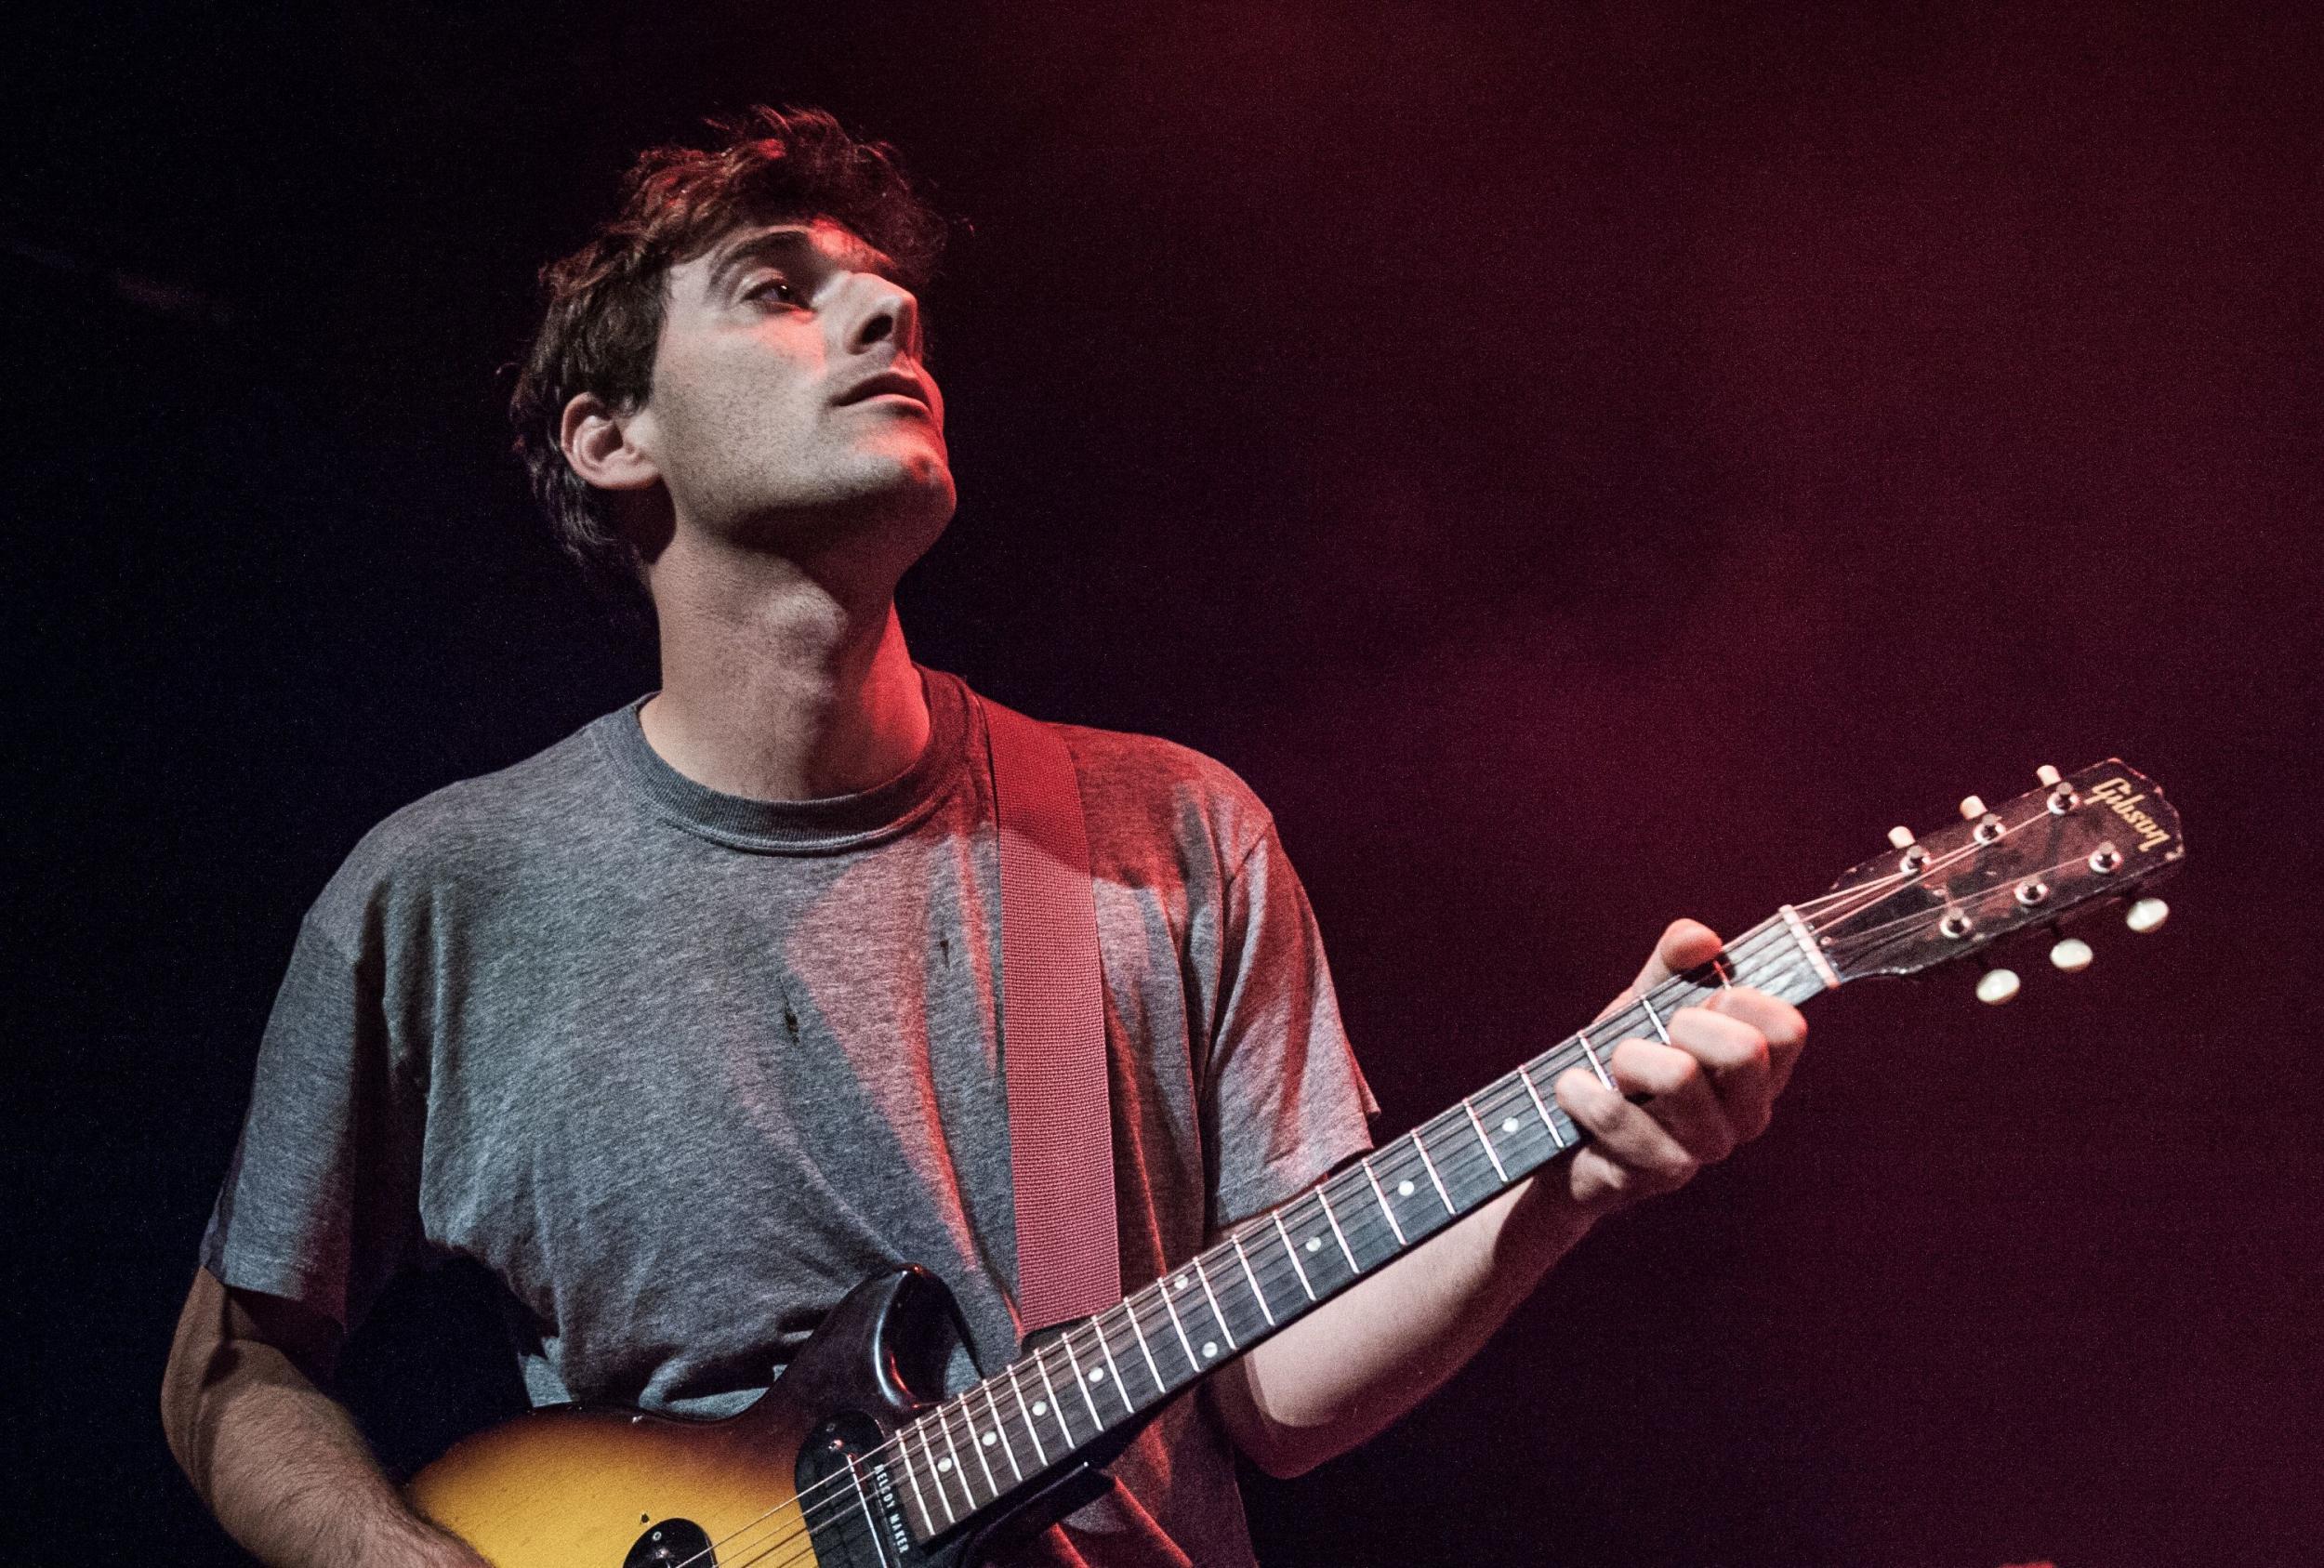 Matt Mondanile performing with Real Estate in concert at The Junction, Cambridge, in 2014